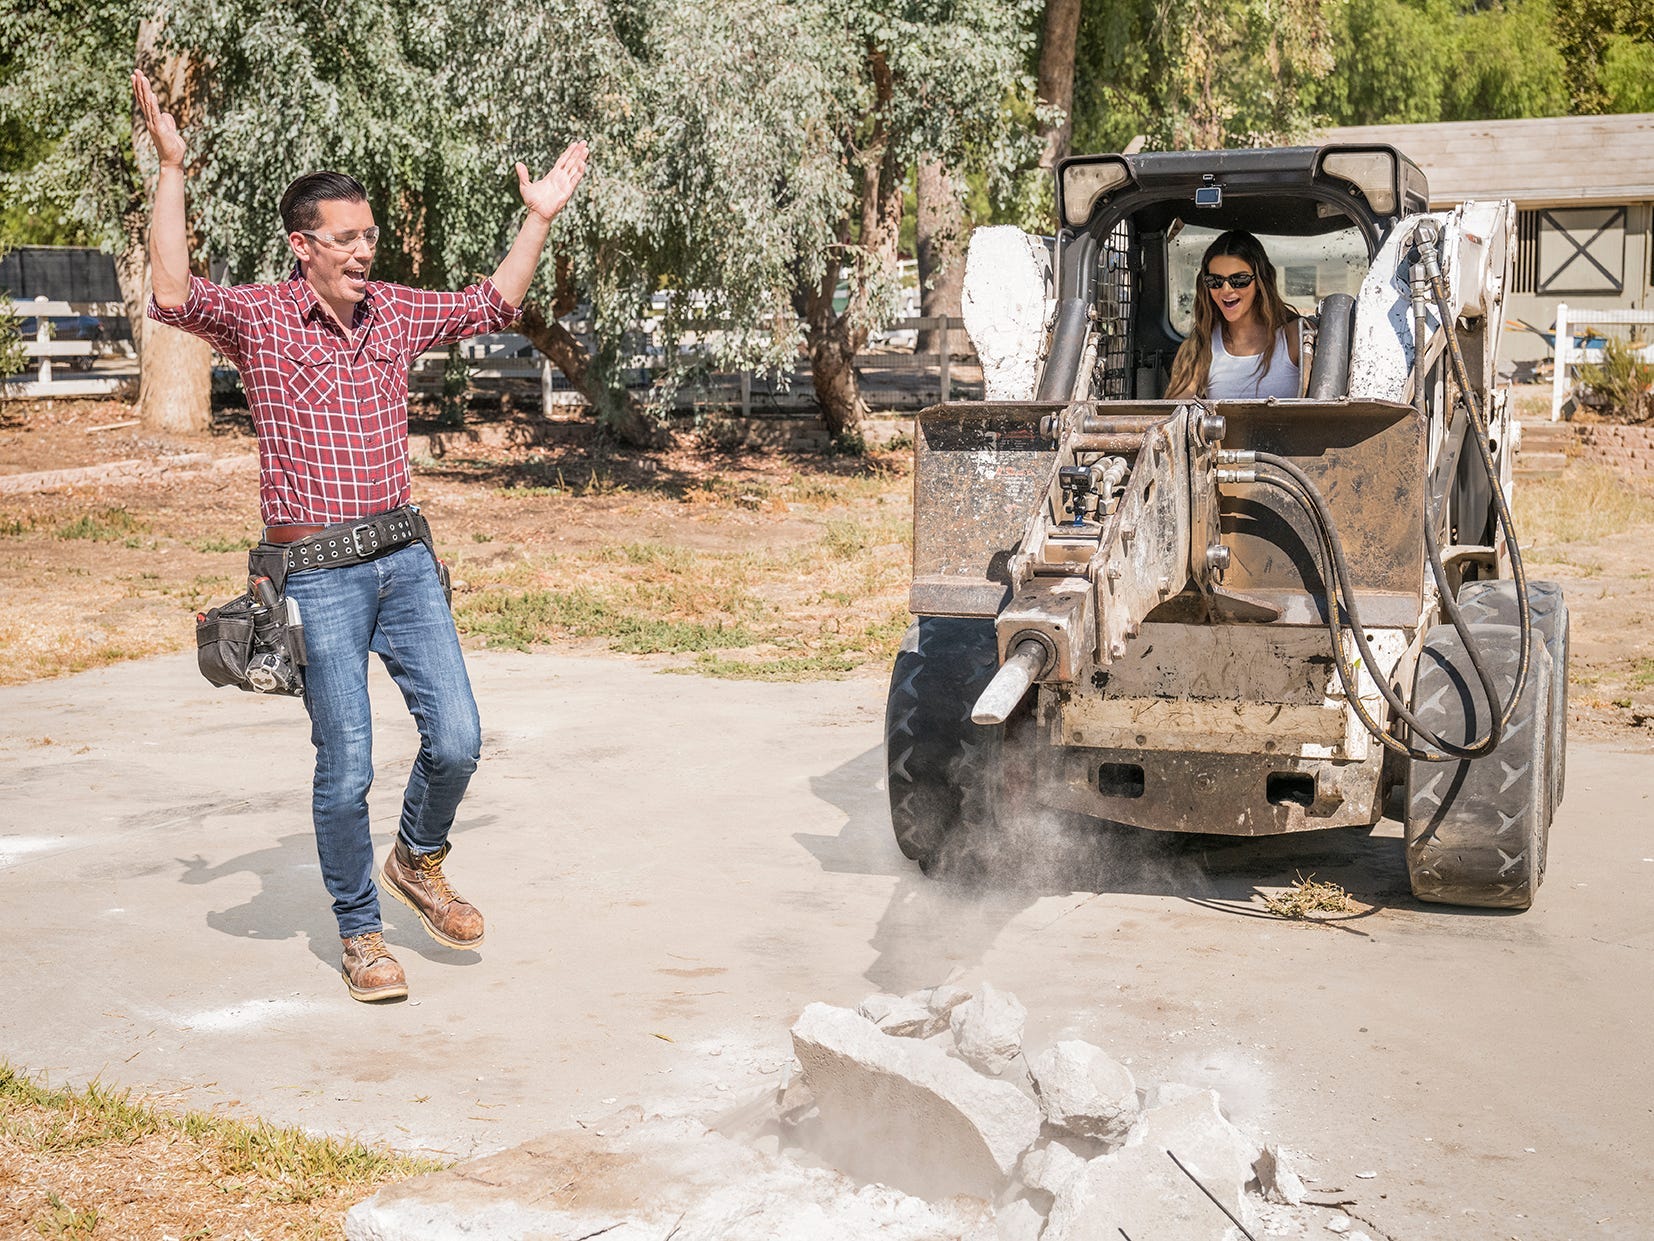 Kendall Jenner drives an excavator while a Property Brother looks on.